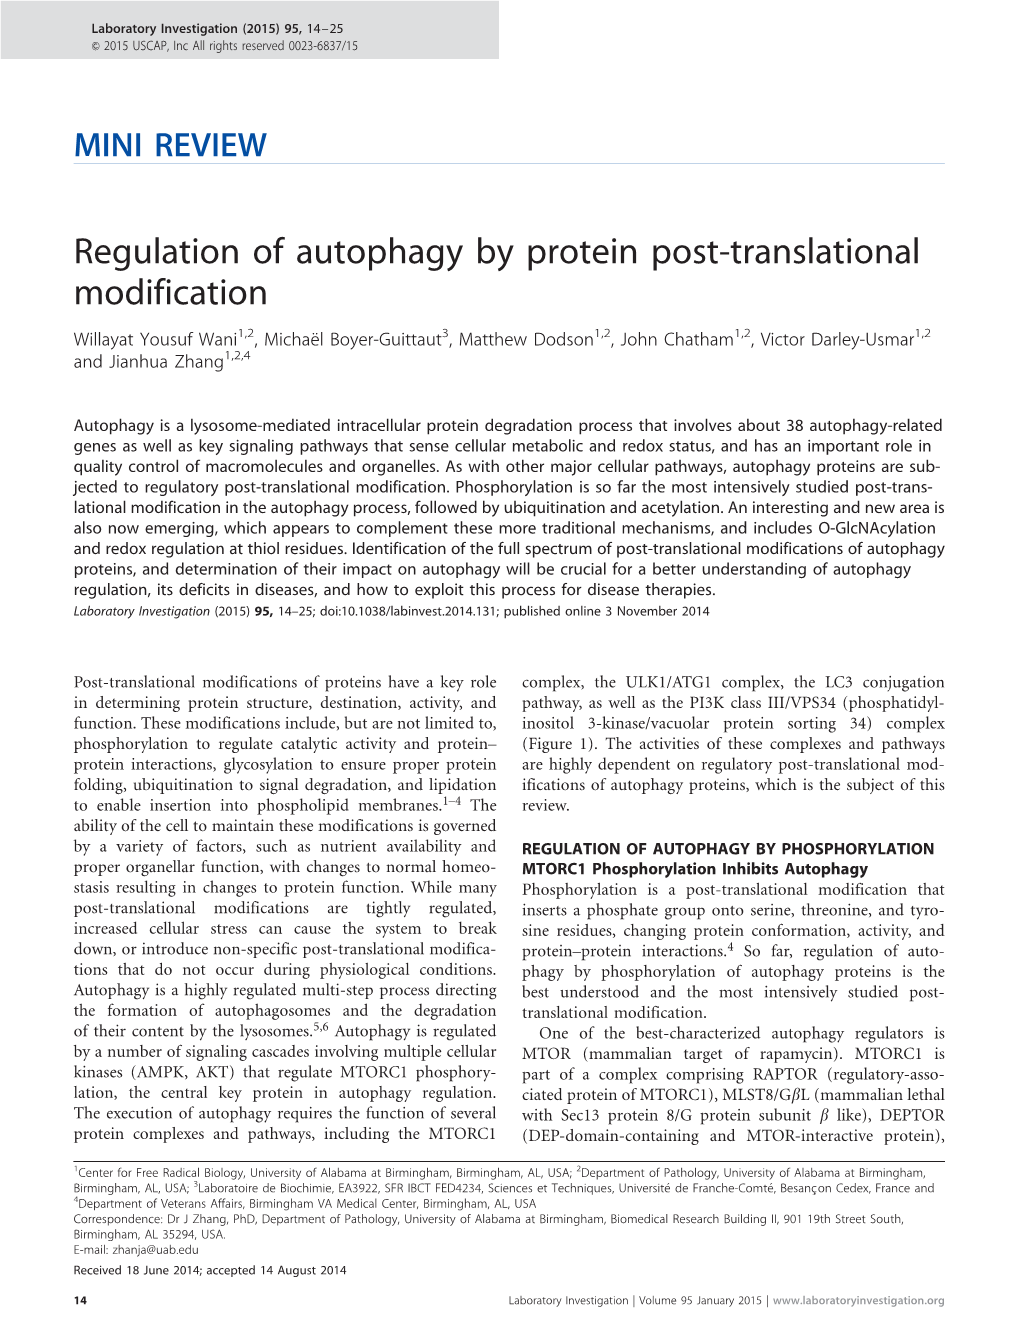 Regulation of Autophagy by Protein Post-Translational Modification